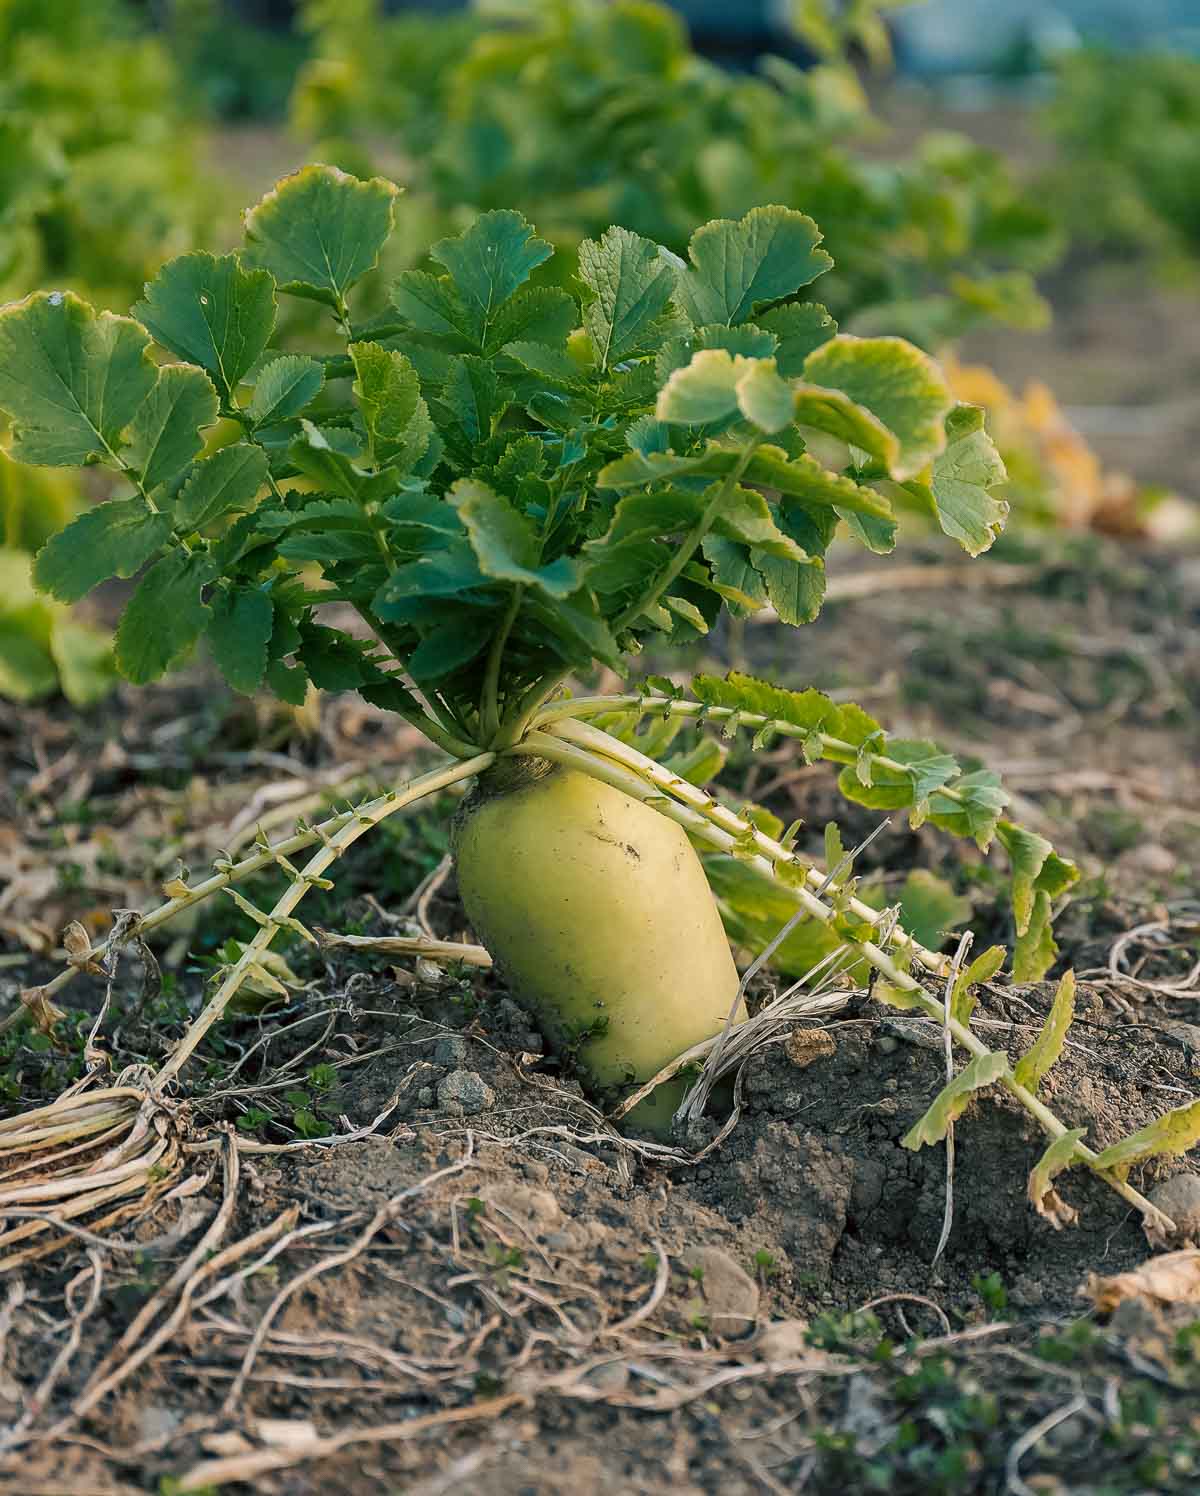 A radish sticking out of the ground planted as a cover crop to improve soils.